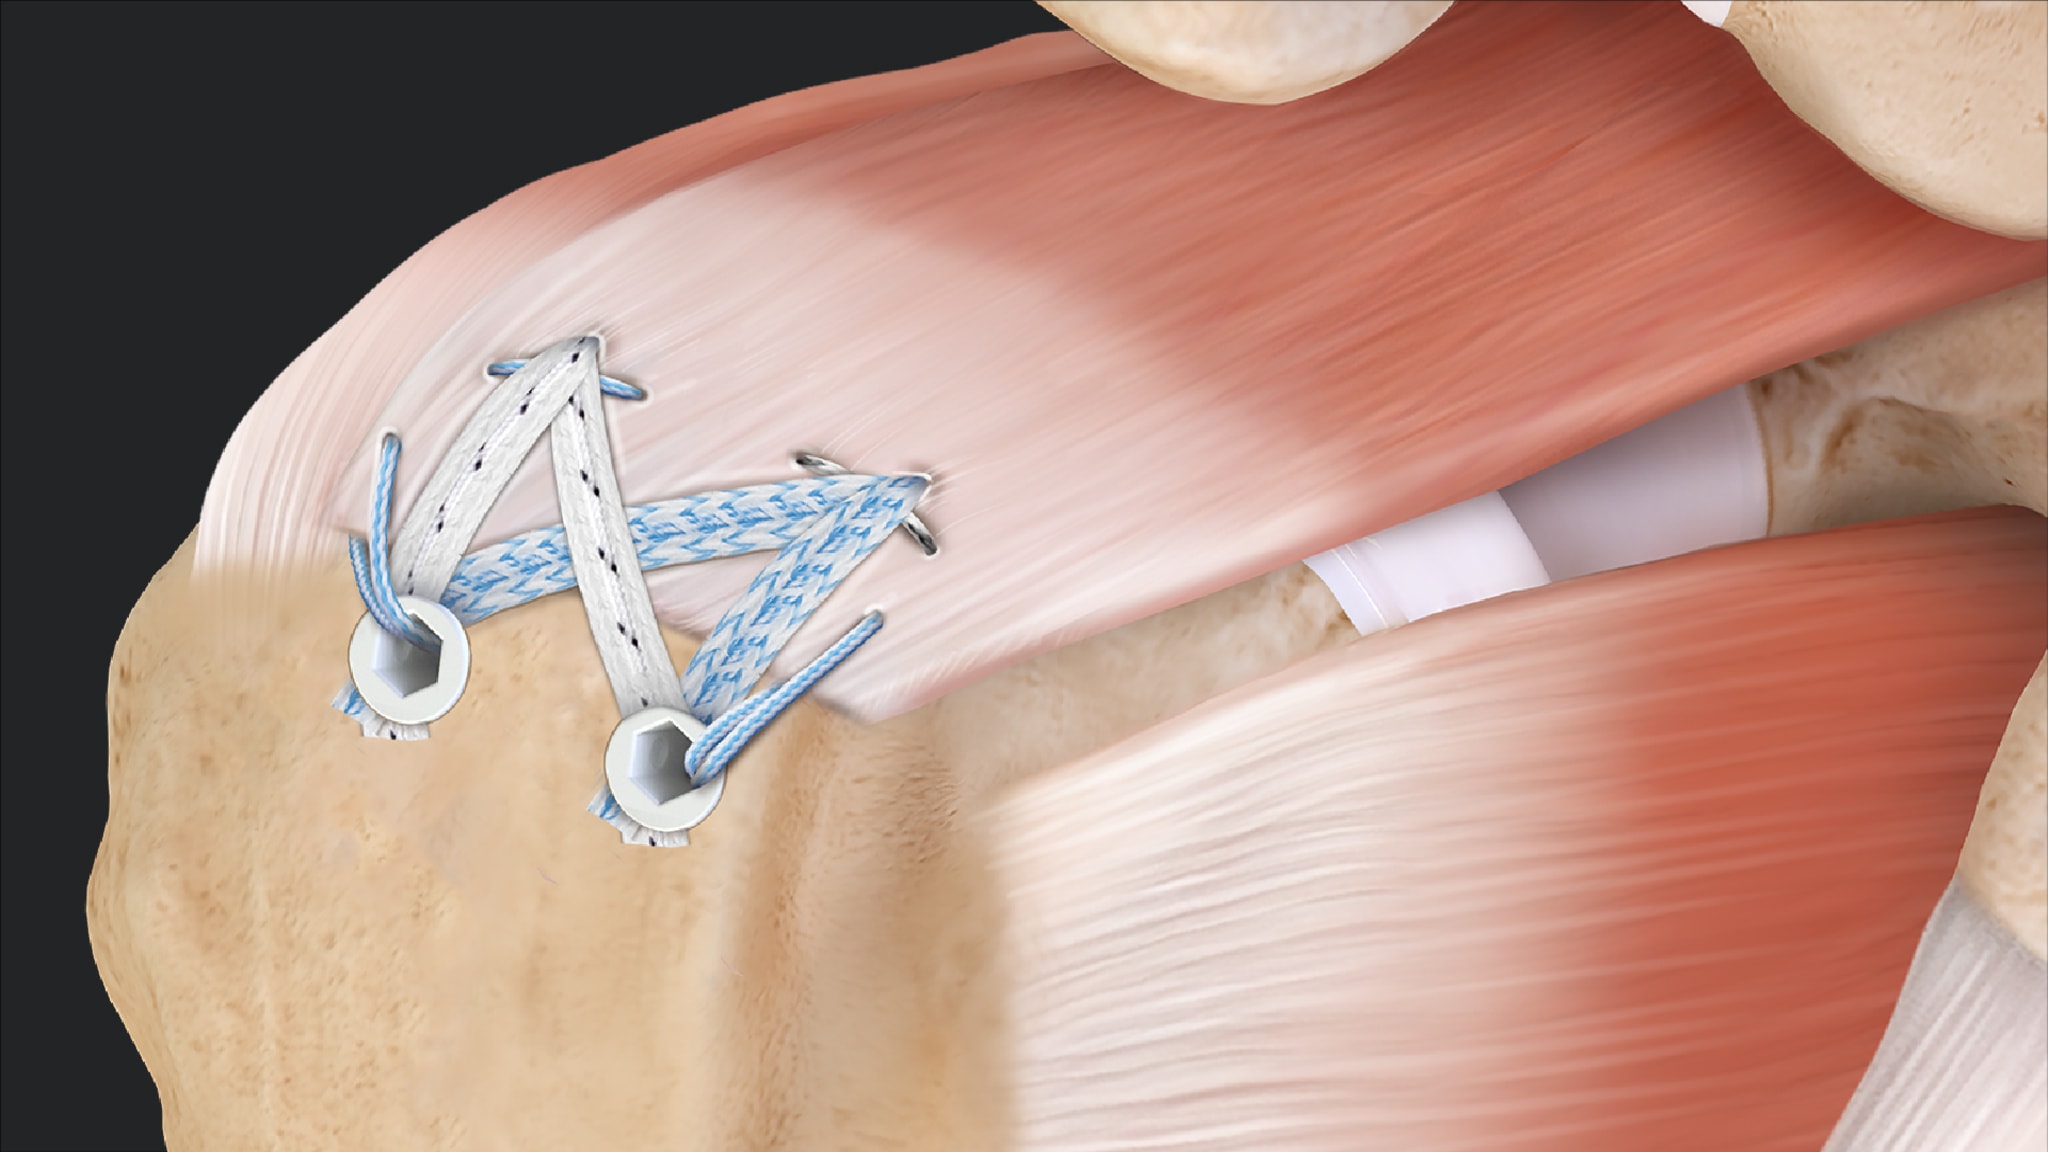 SpeedBridge™ Rotator Cuff Repair With Medial Ripstop Sutures and Knotless SwiveLock® Anchor